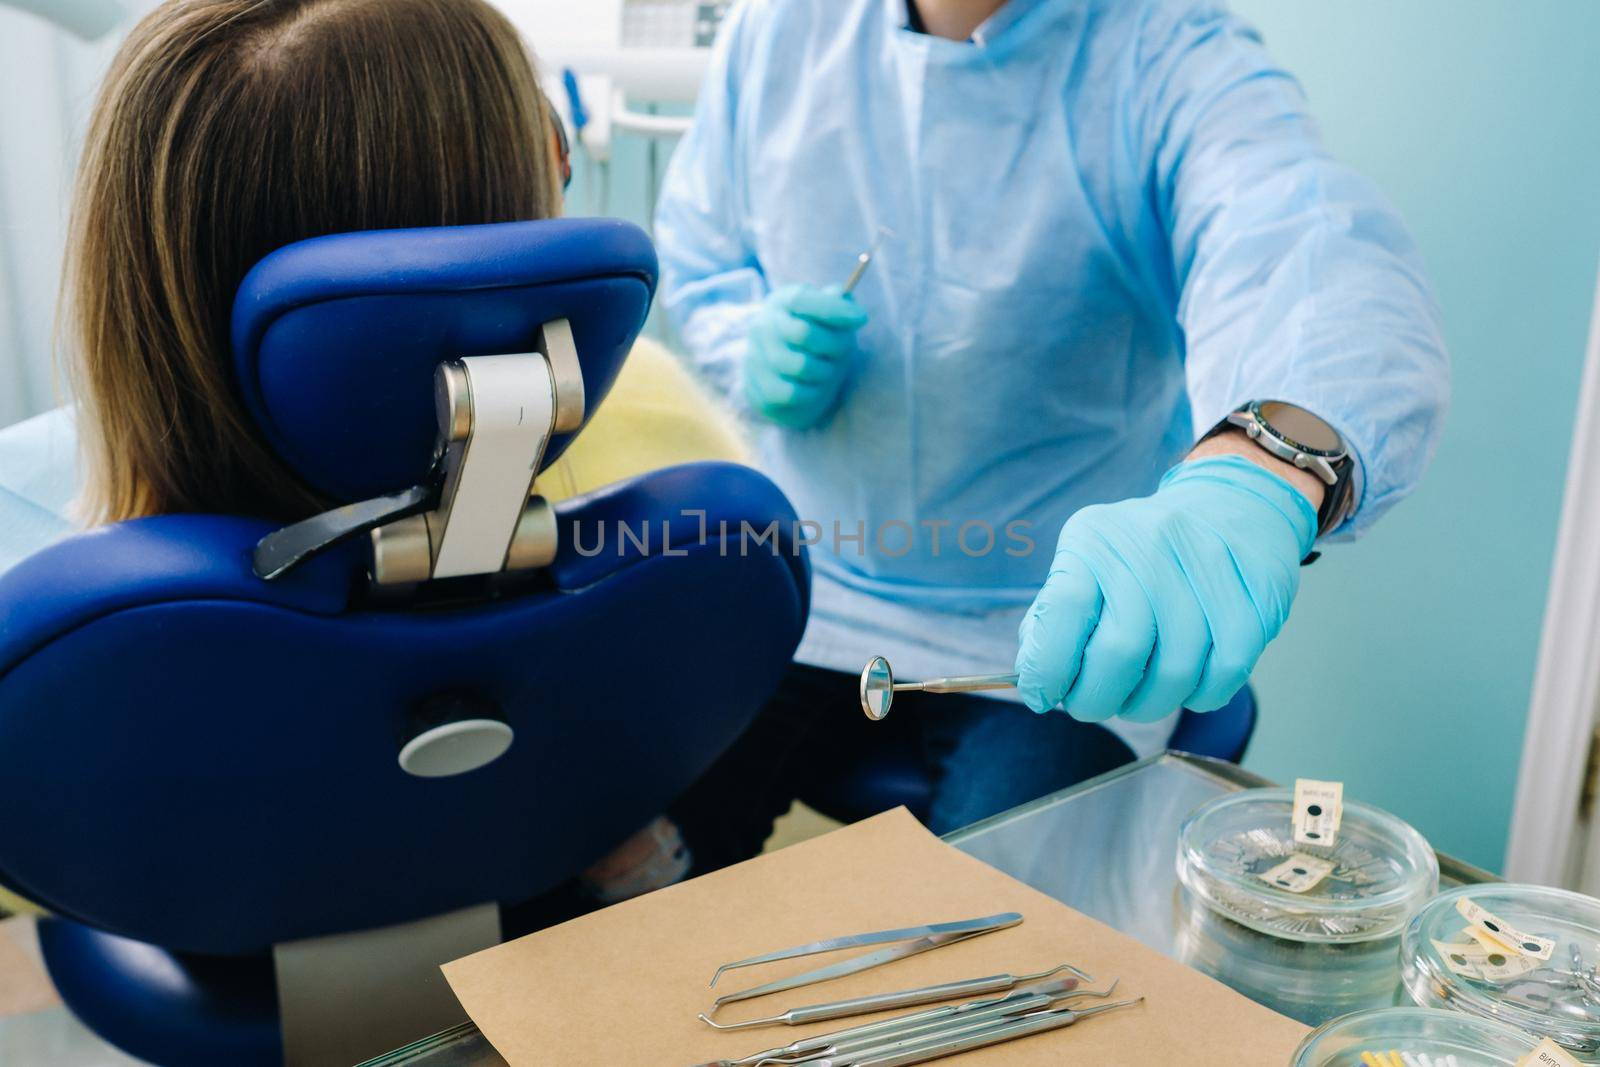 The dentist takes the tools to treat the patient's teeth by Lobachad